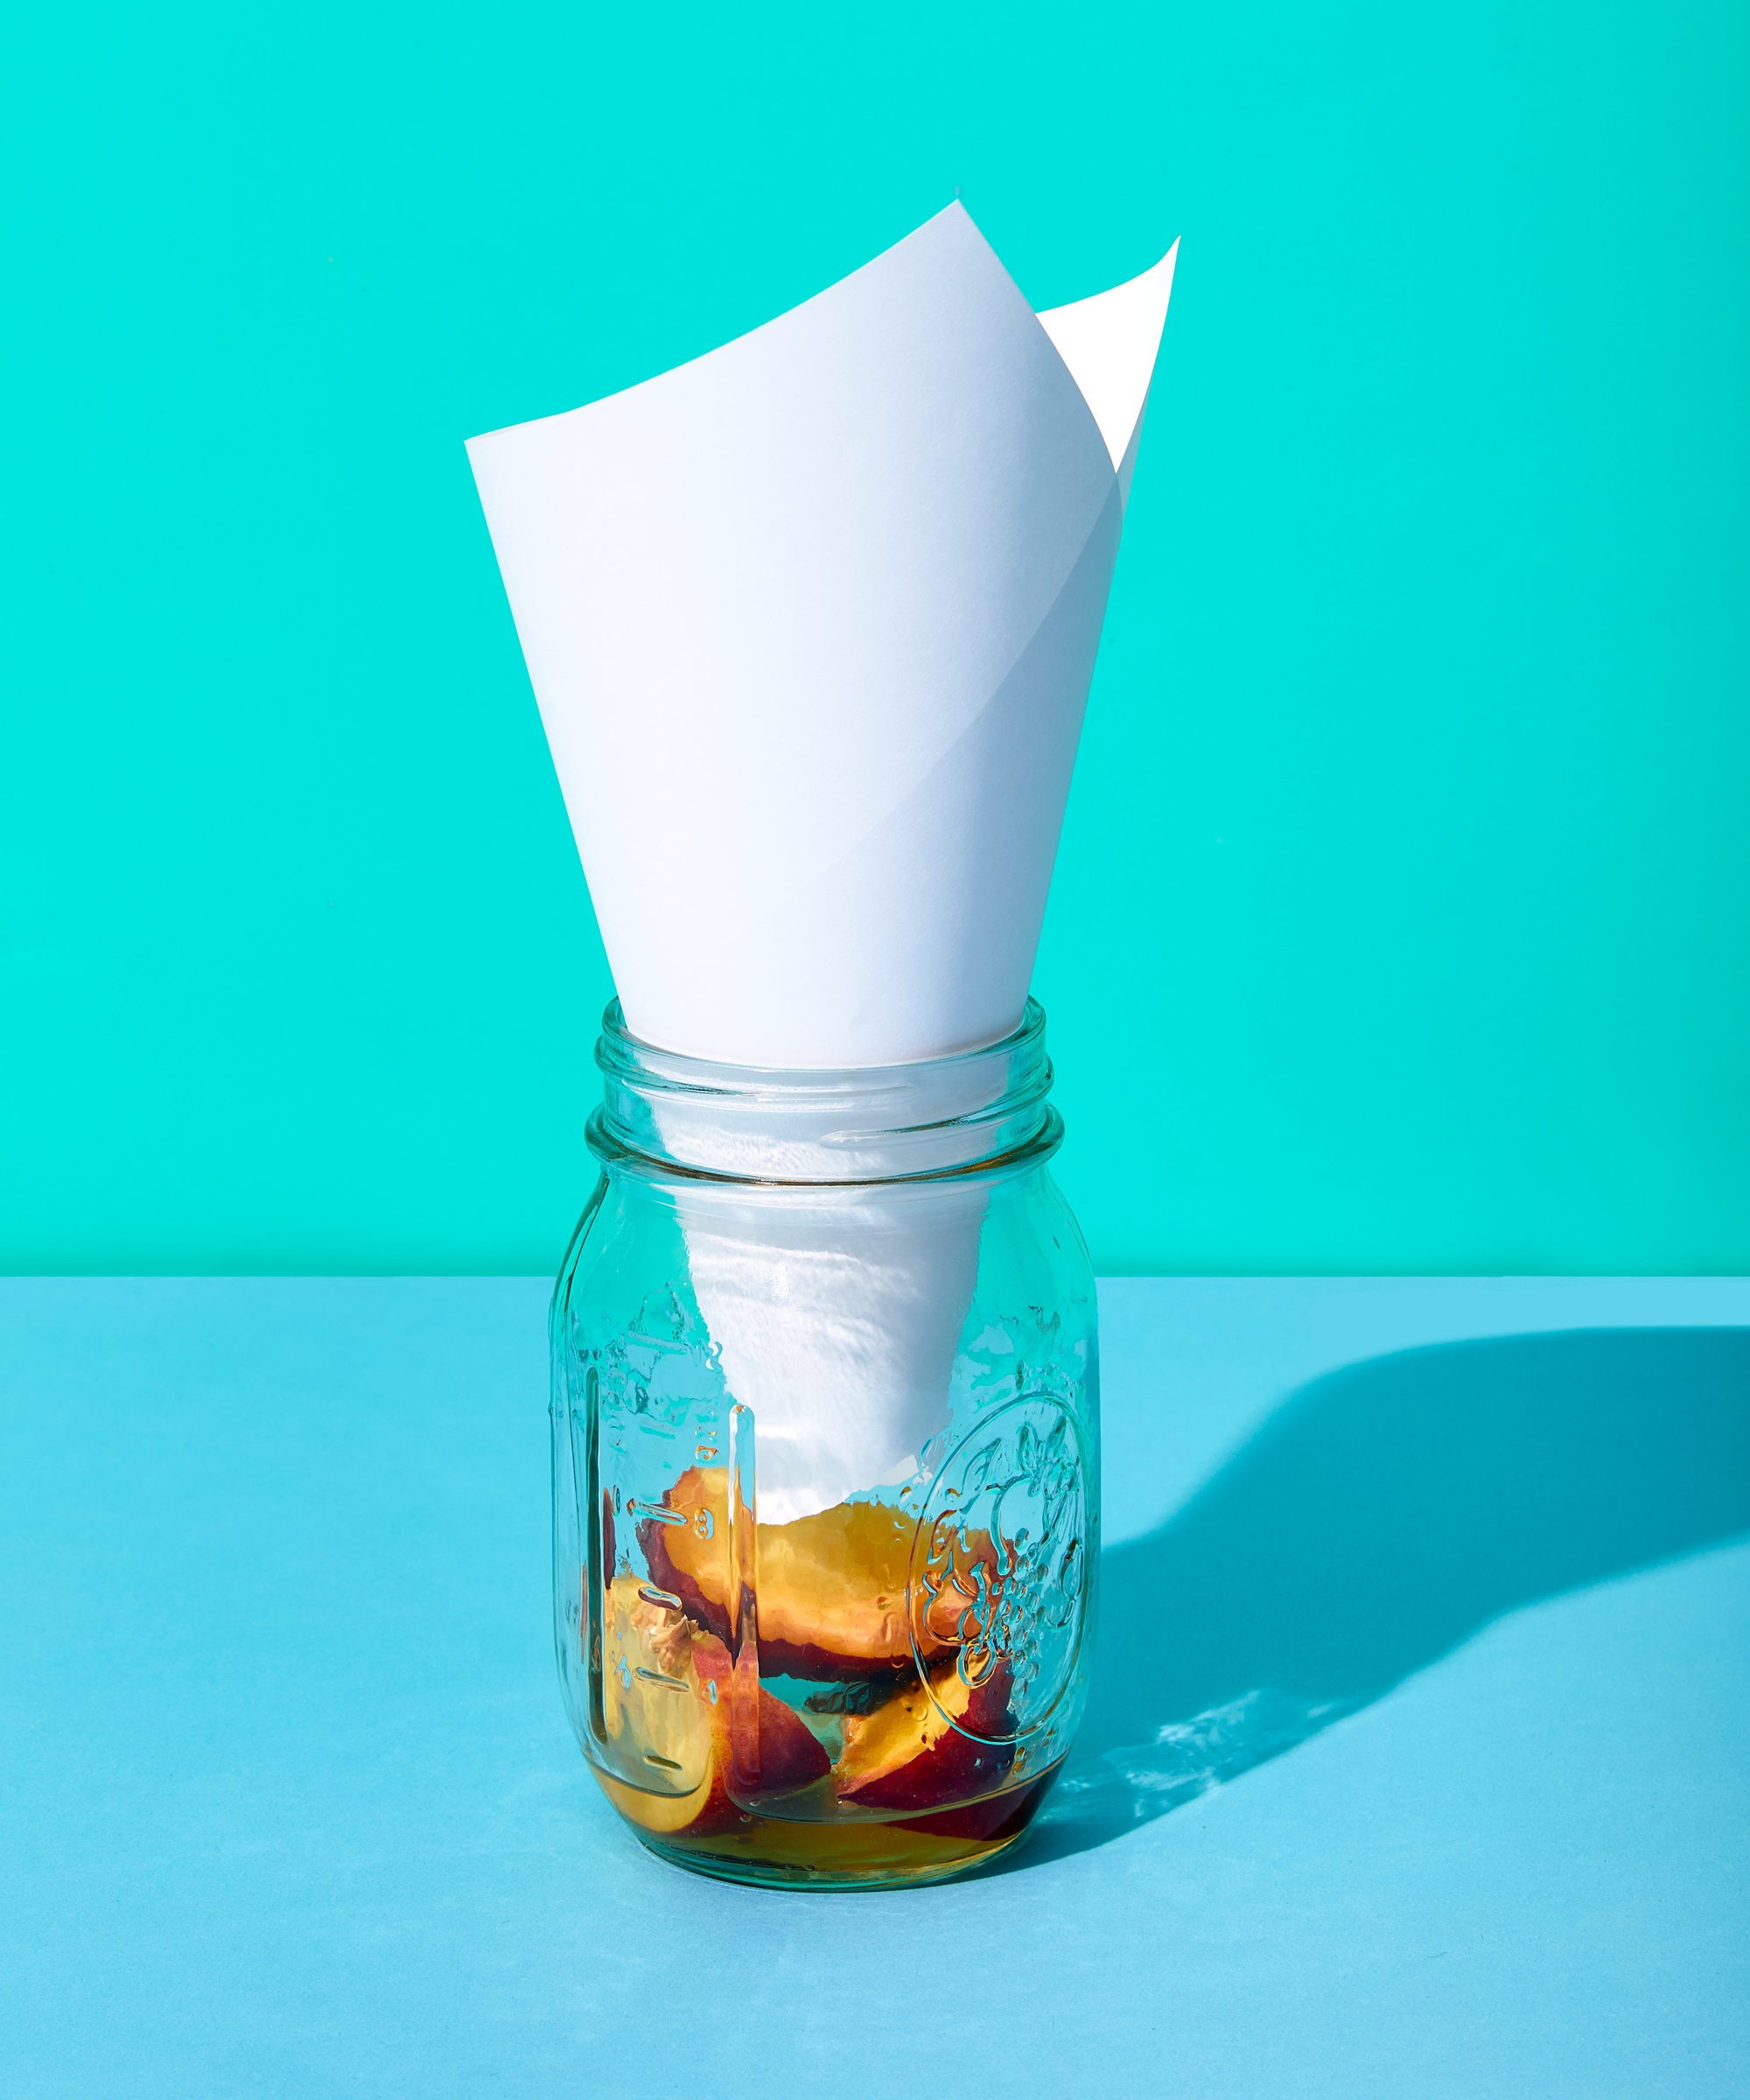 How to Get Rid of Fruit Flies: 6 Easy DIY Traps